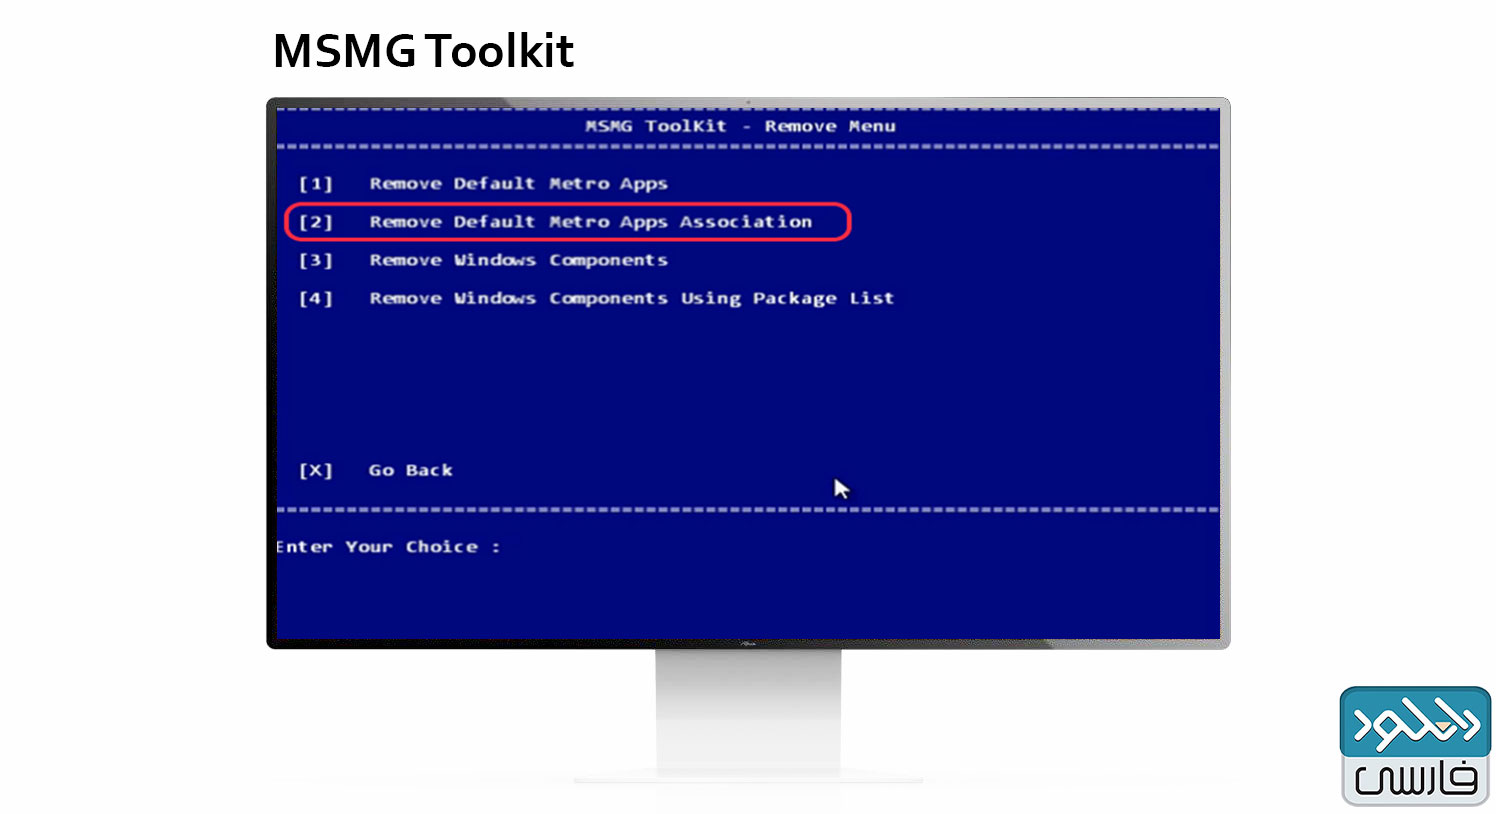 msmg toolkit instructions